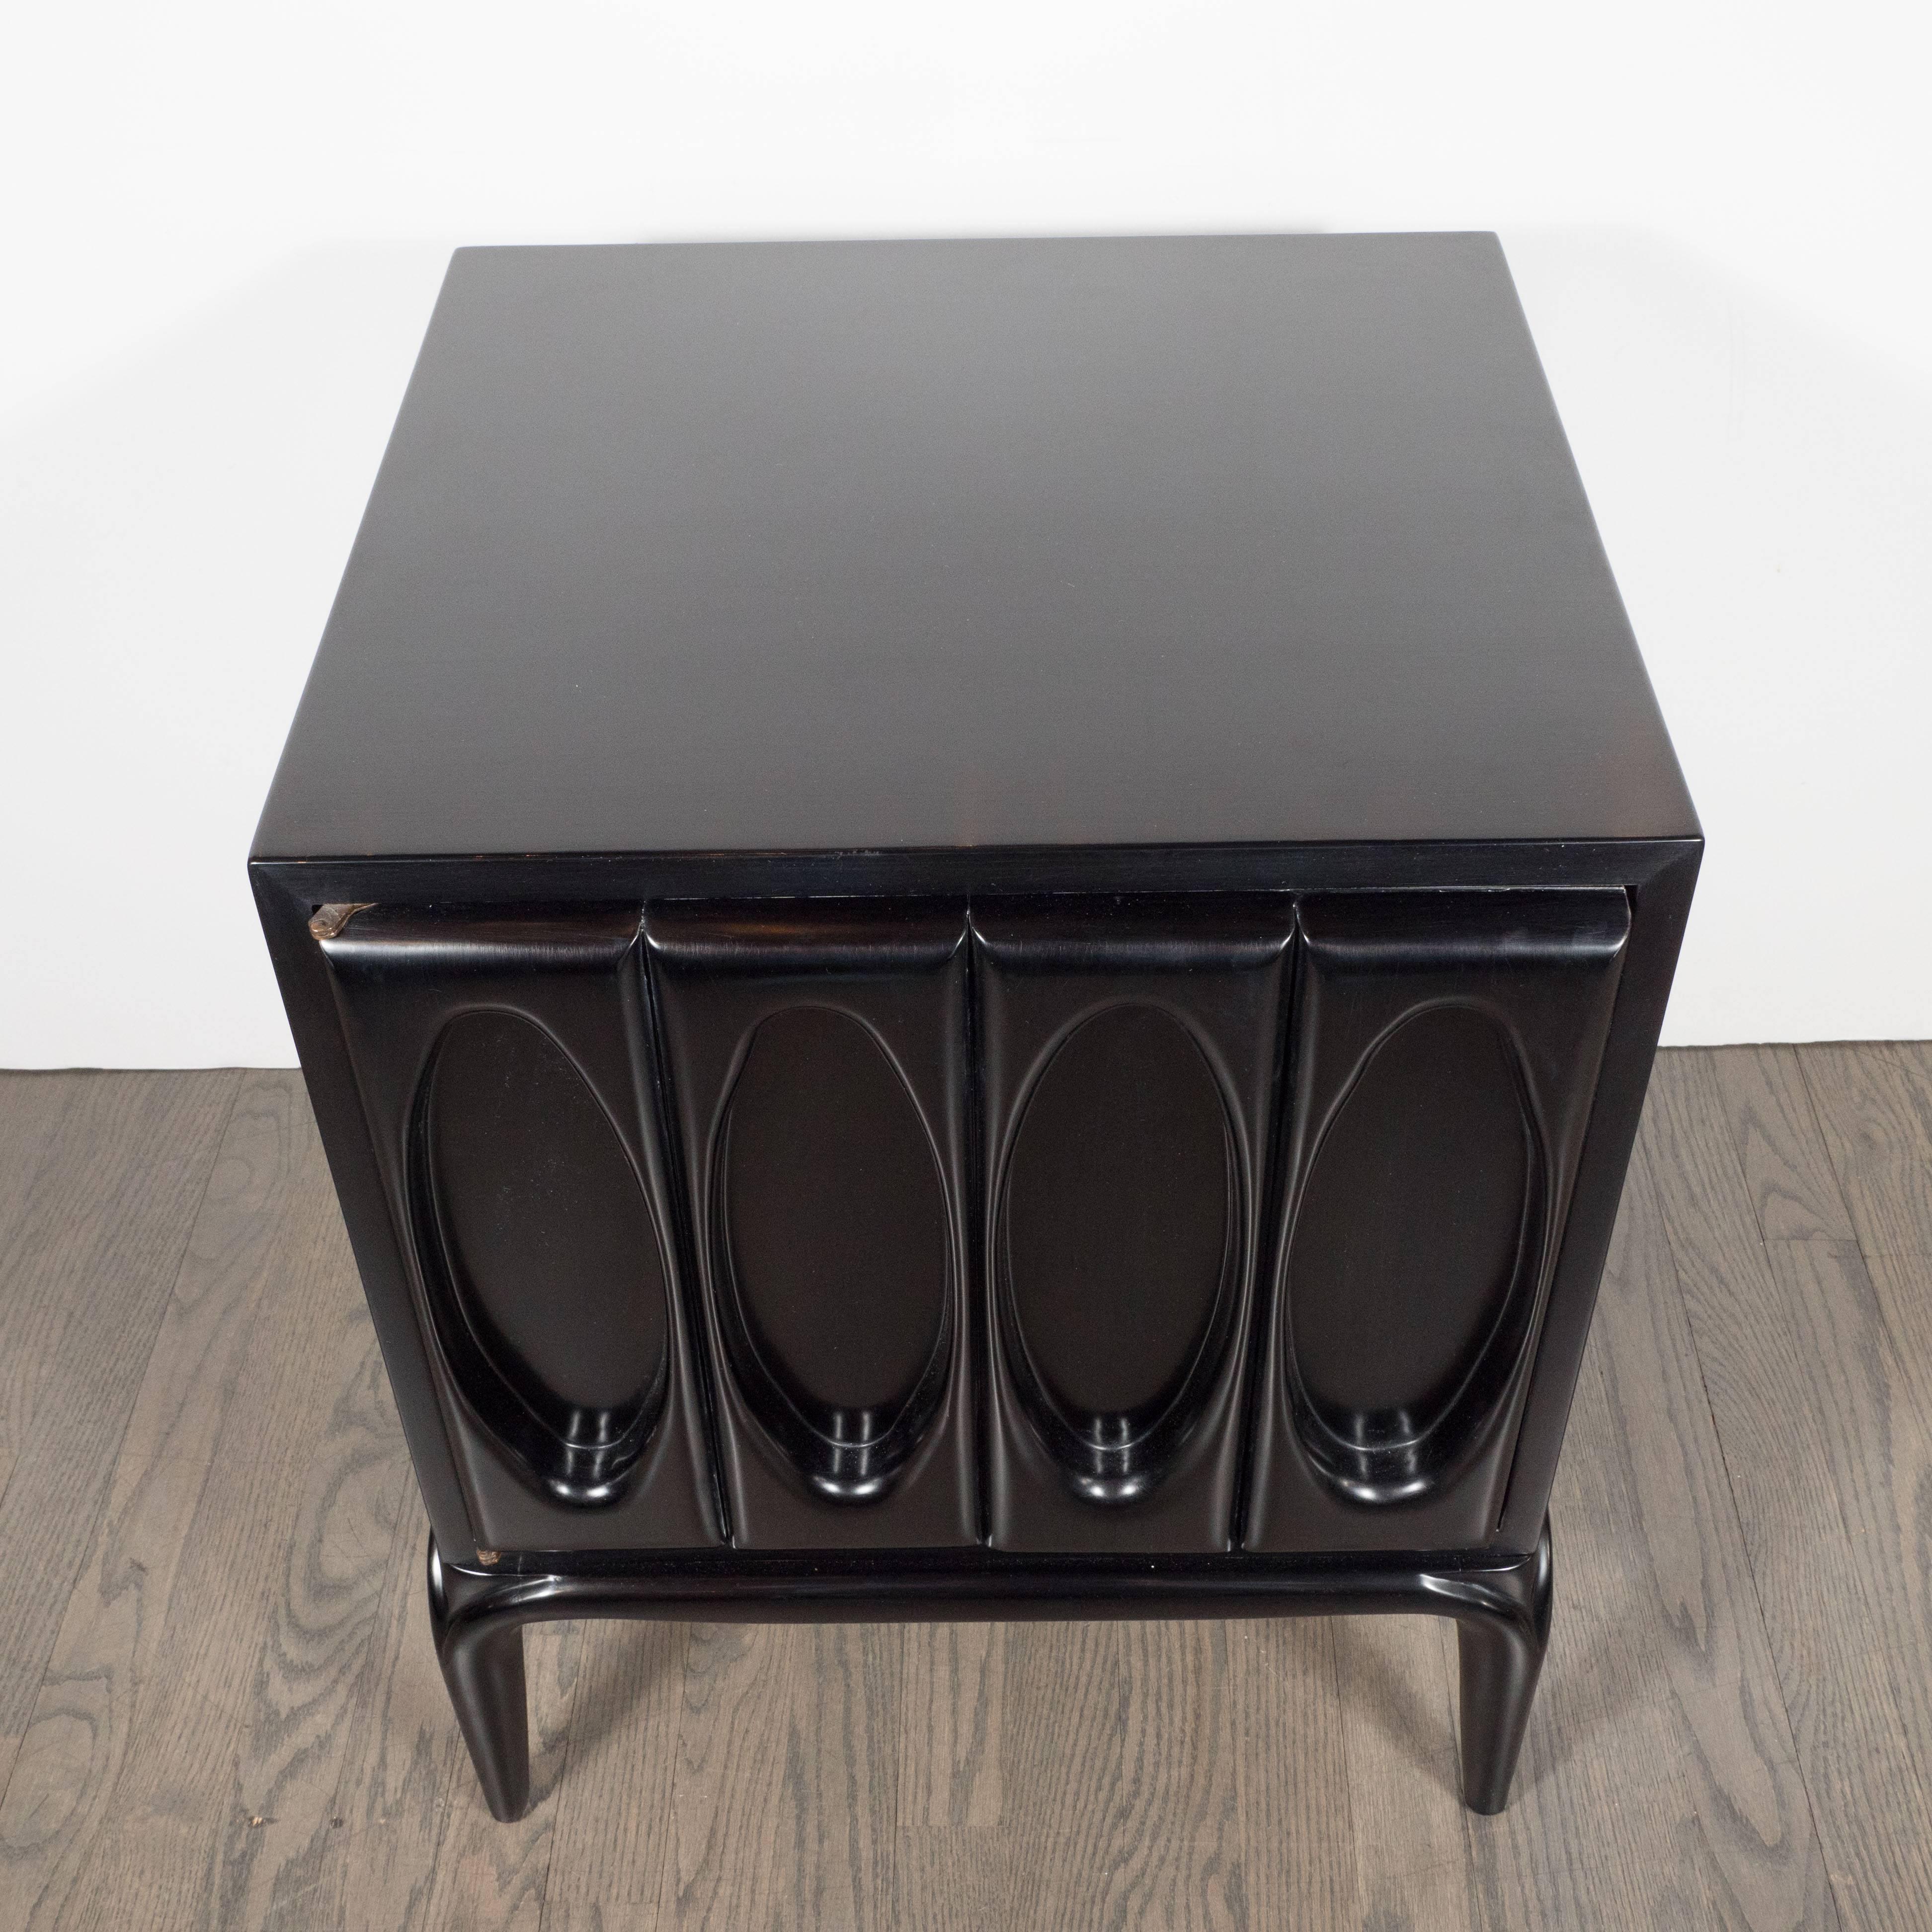 This sophisticated pair of ebonized walnut end tables or nightstands feature four rectangular panels with ovoid shaped cut-outs, tapered conical legs, and an interior cabinet with one glass shelf. This pair is the embodiment of simple elegance: